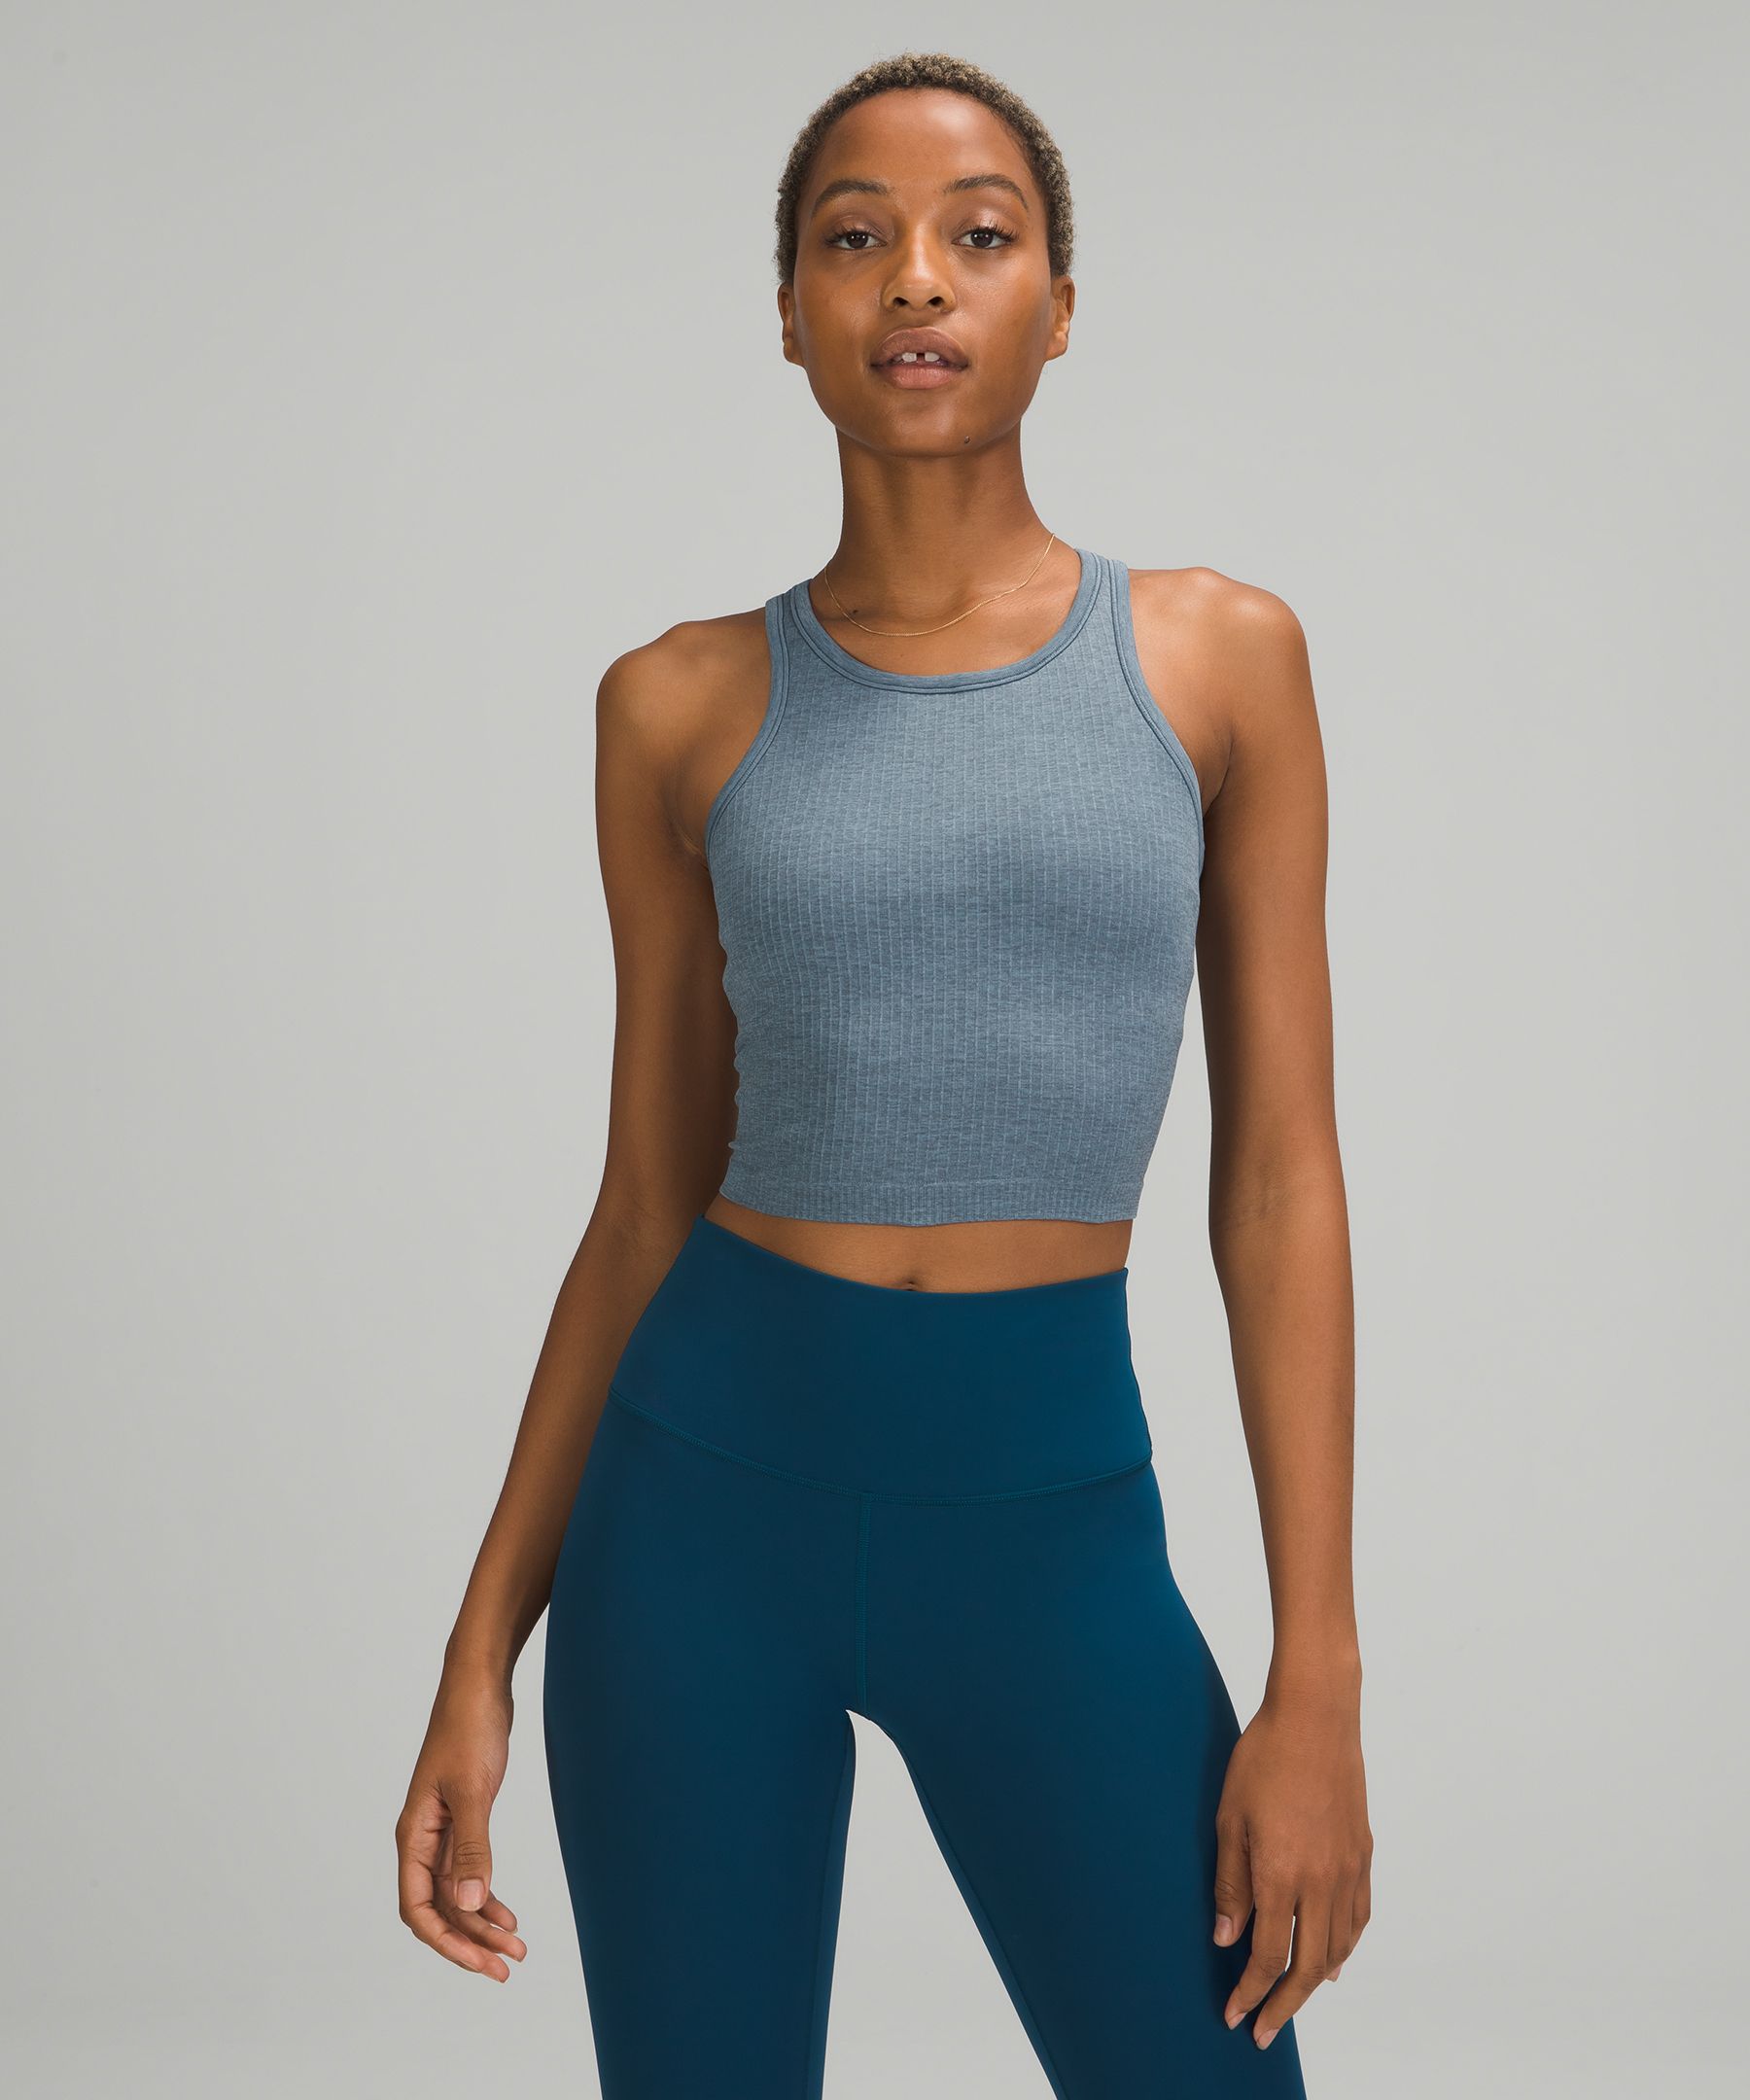 Yoga Tops With Built In Bra Cotton Patch